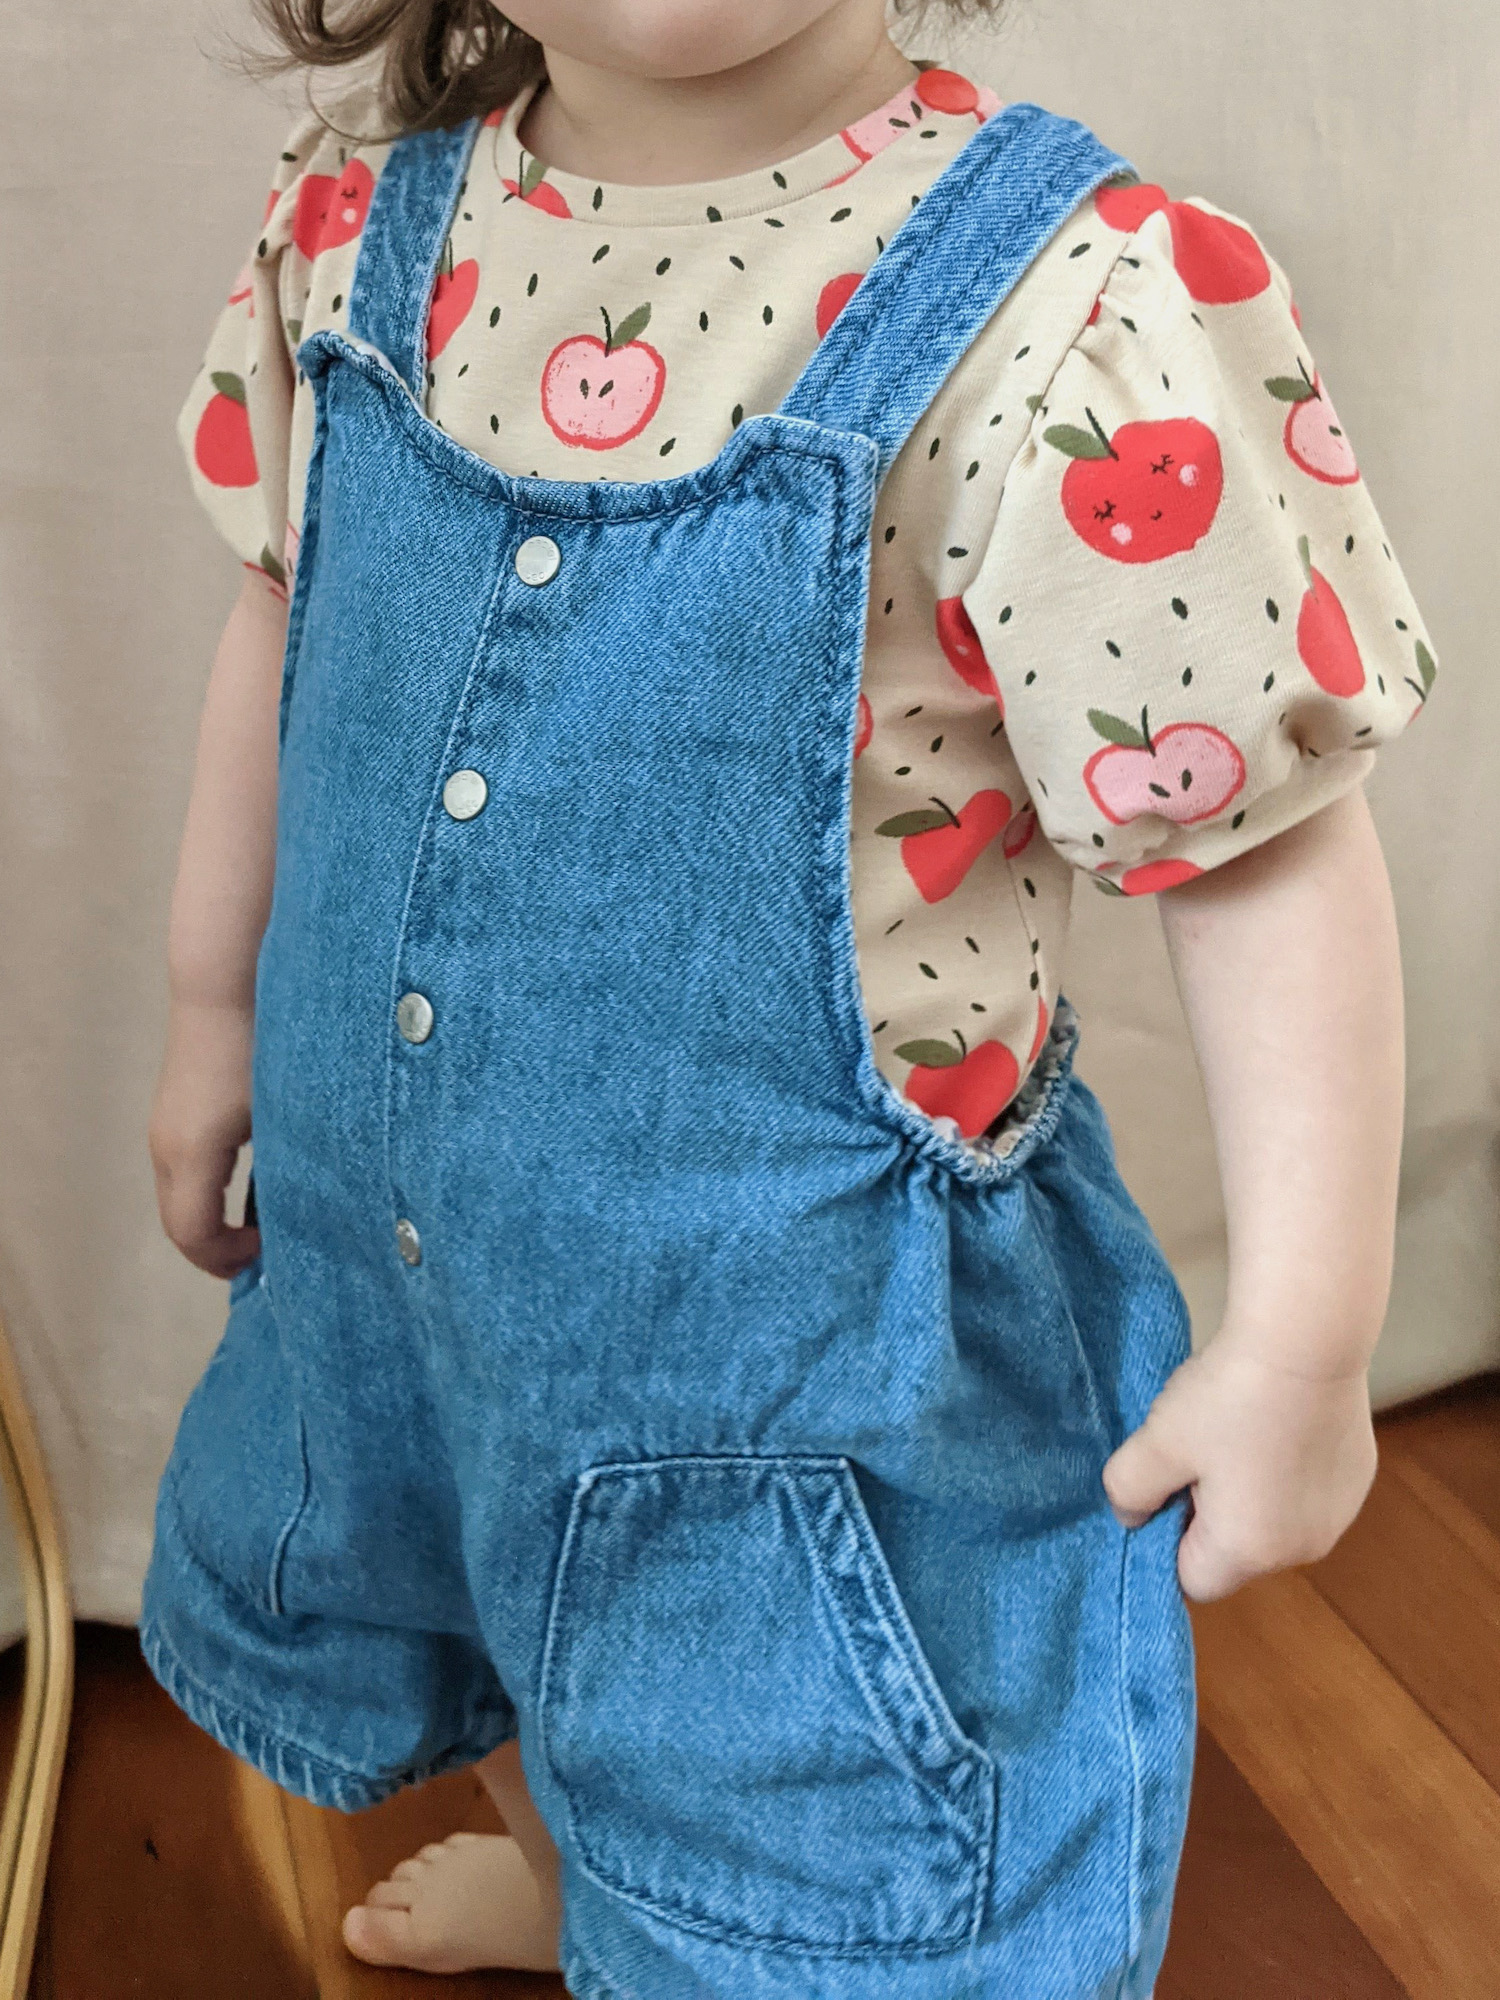 Child wearing the Baby/Child Nuage Mini Balloon Sleeve Shirt sewing pattern from Camimade on The Fold Line. A t-shirt pattern made in light to medium weight knit fabrics, featuring short balloon sleeves, round neck and shoulder opening with snap fasteners.